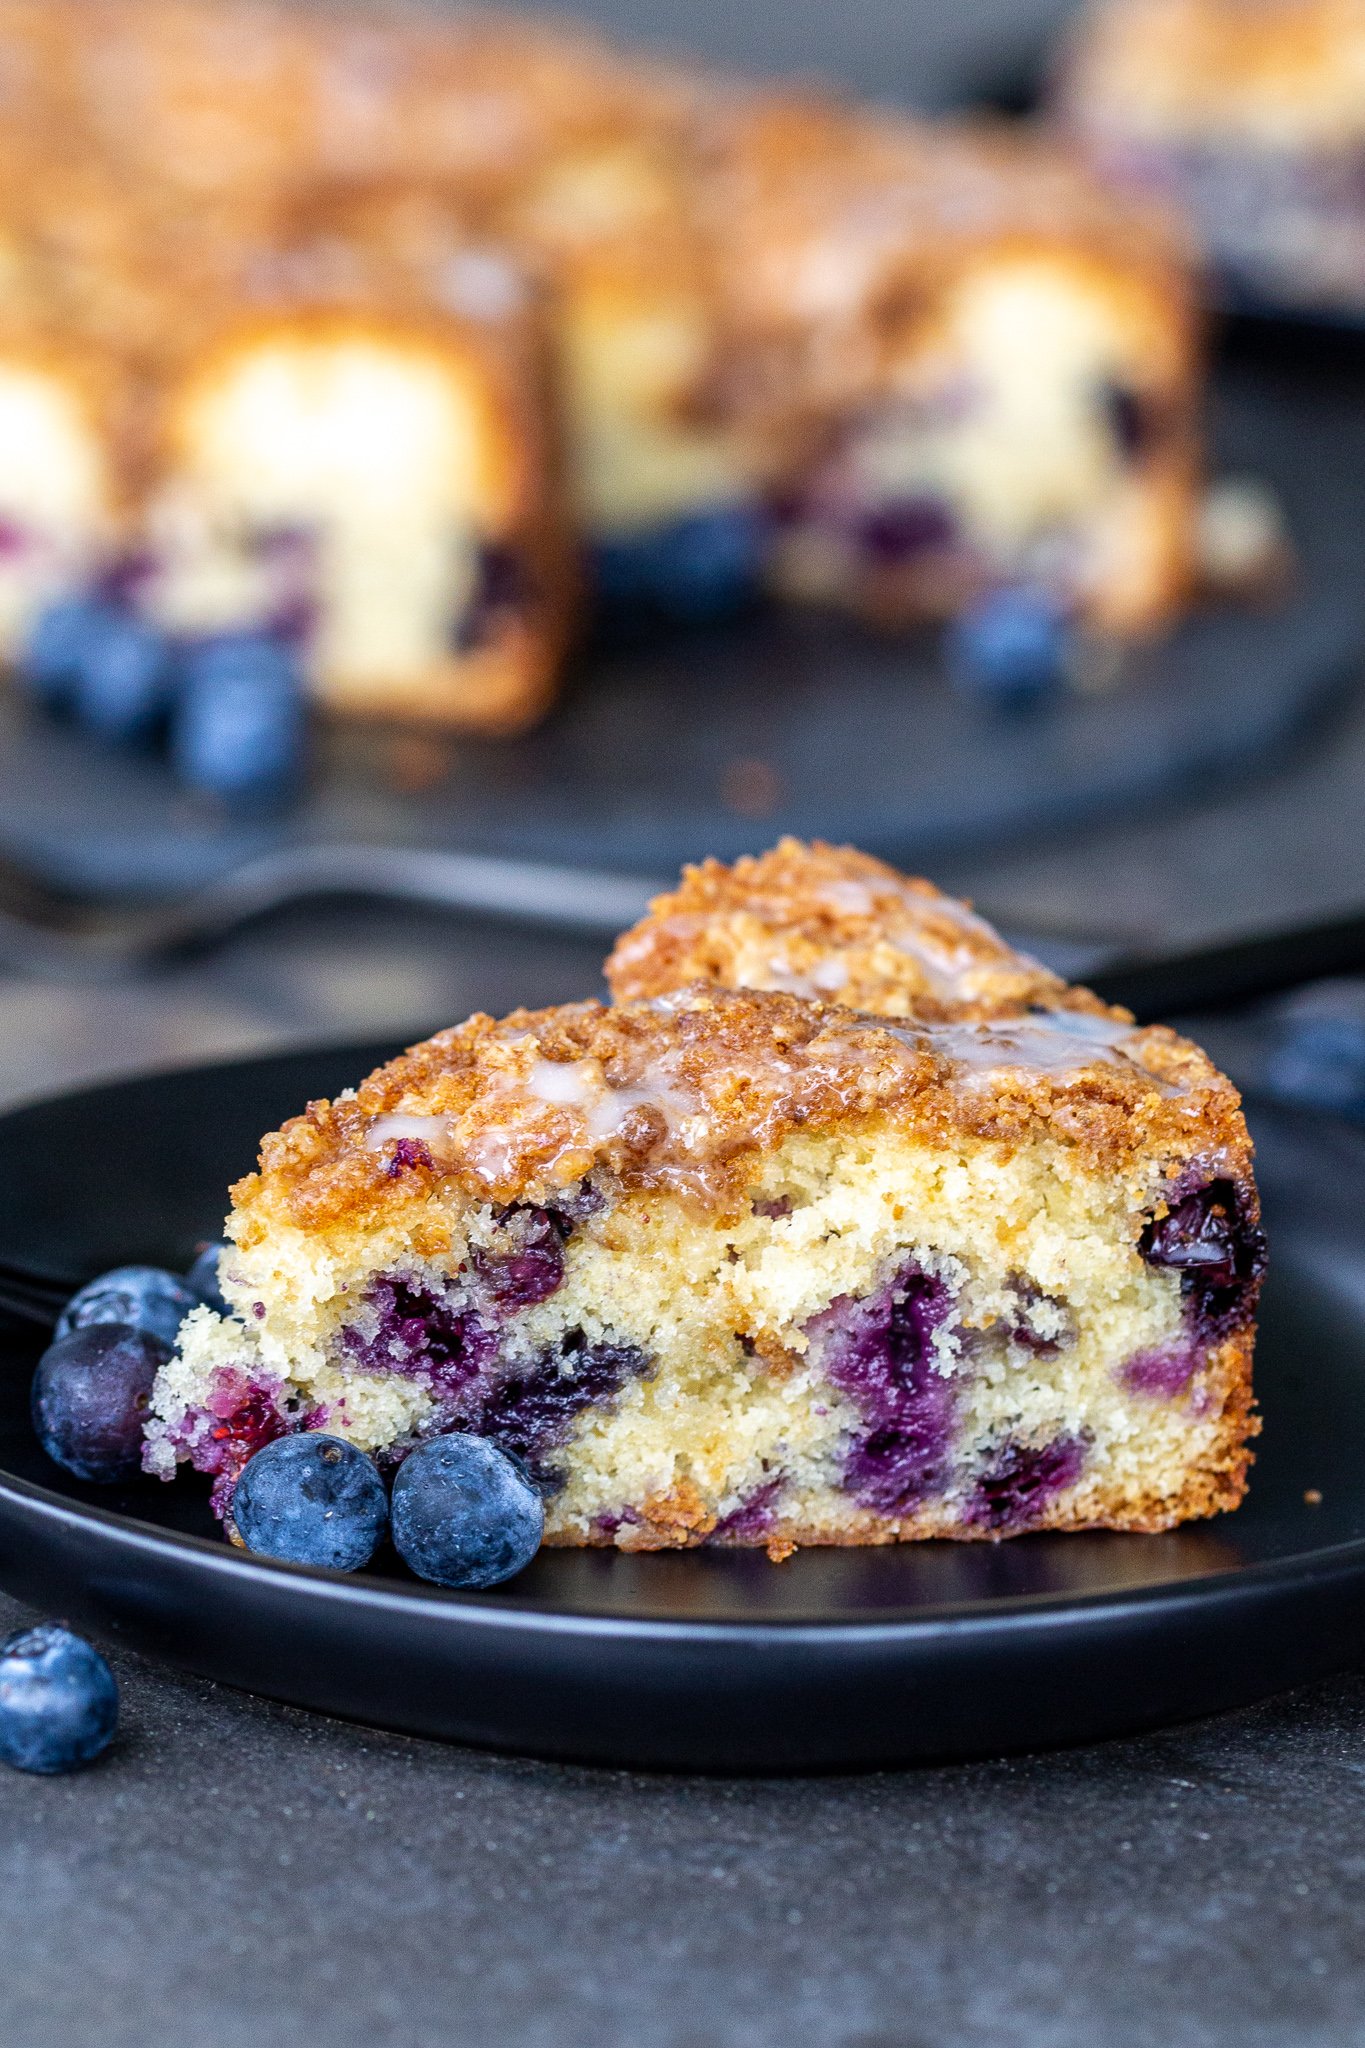 Blueberry Bread with Crumb Topping - Joyous Apron